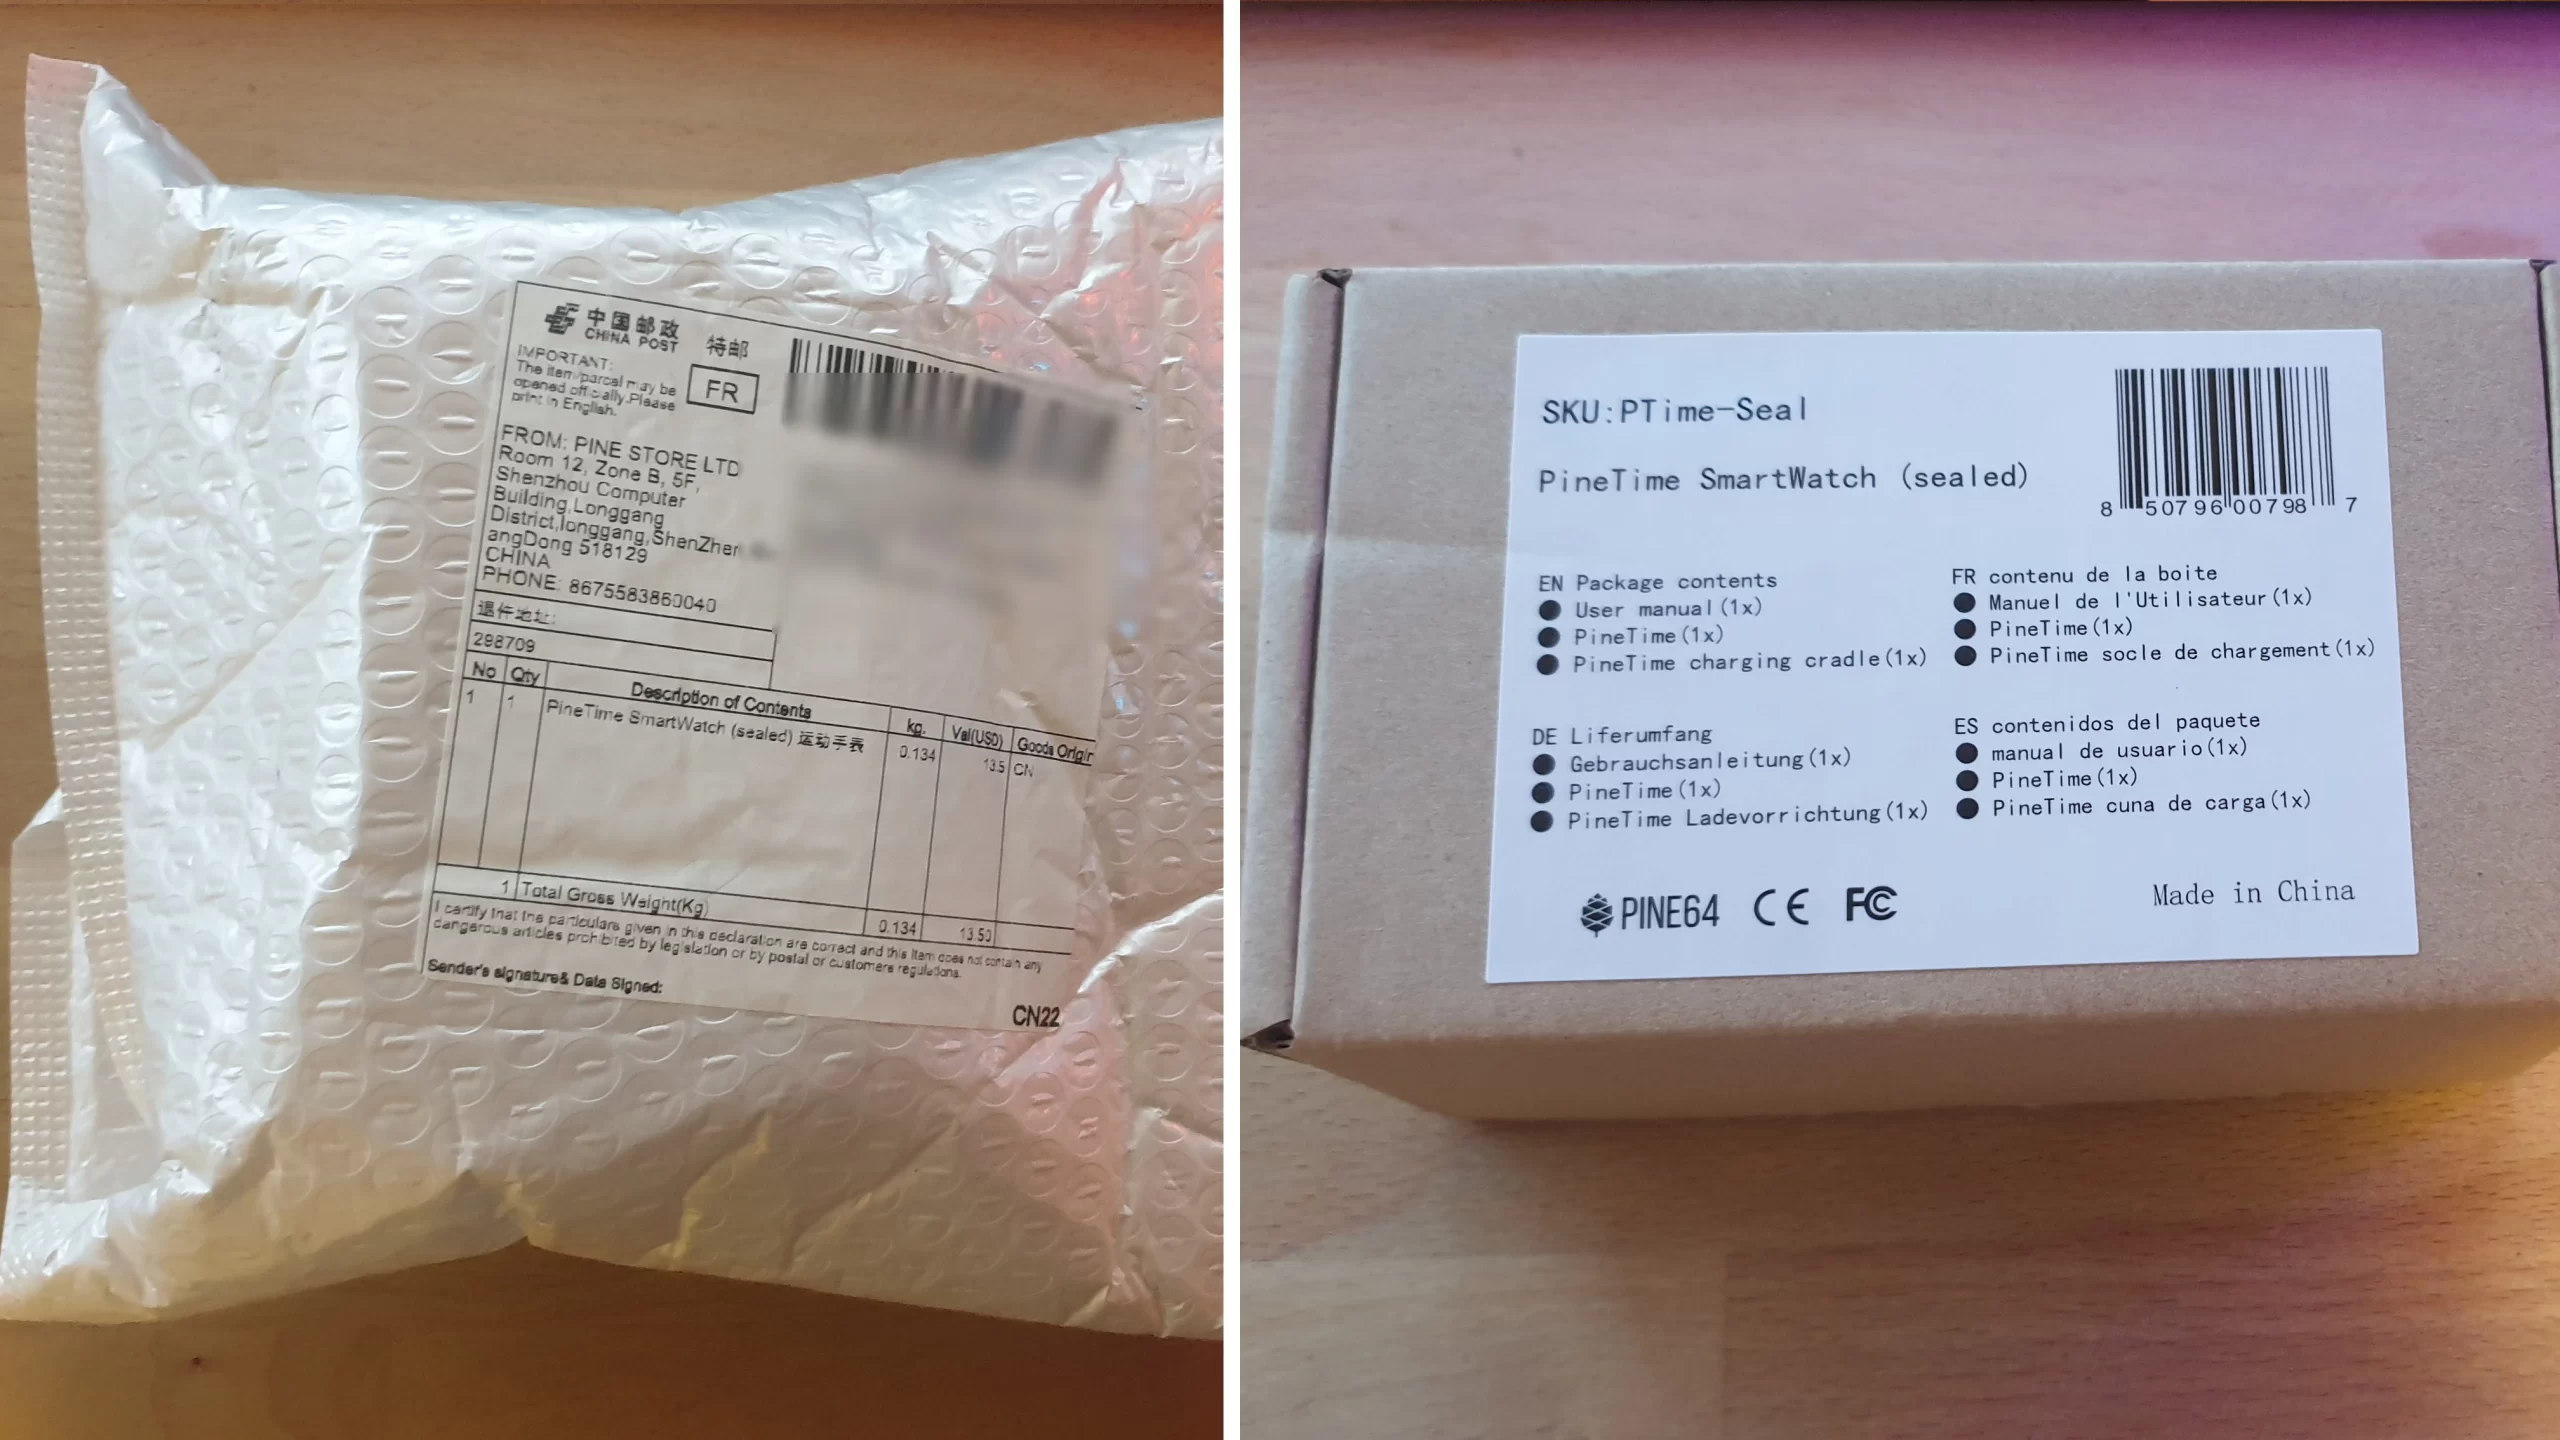 The box of the PineTime when it arrived.